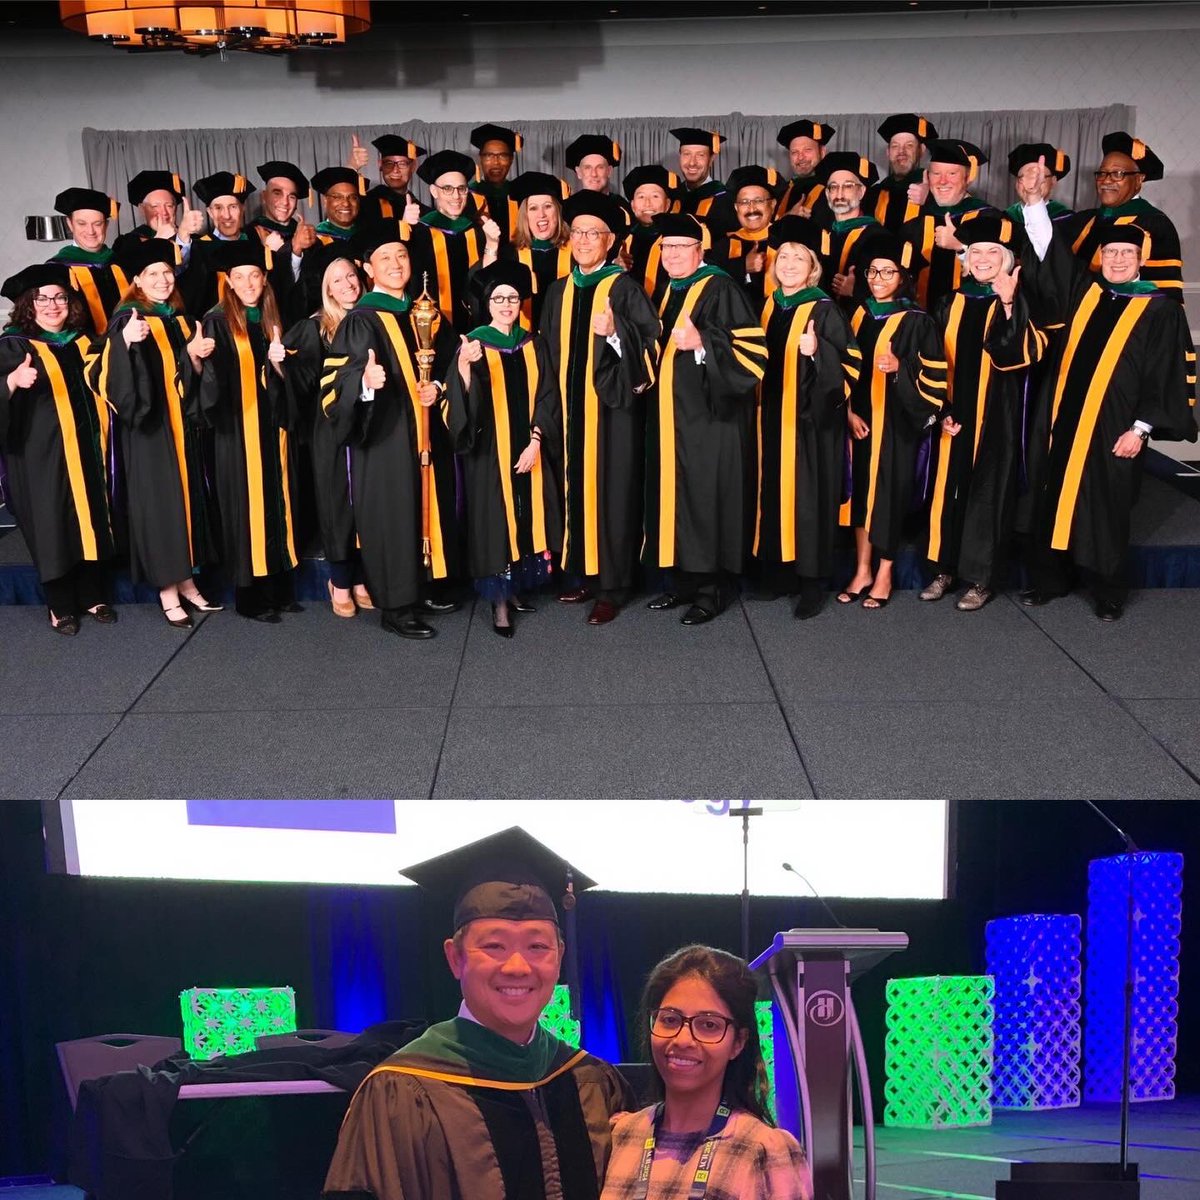 Todays #ACR2024 pic is of convocation. The ceremony where we induct the new fellows and celebrate other award winners. Top pic is the most recent slate of Board of Chancellors. Bottom is my mentor who introduced me to organized medicine.